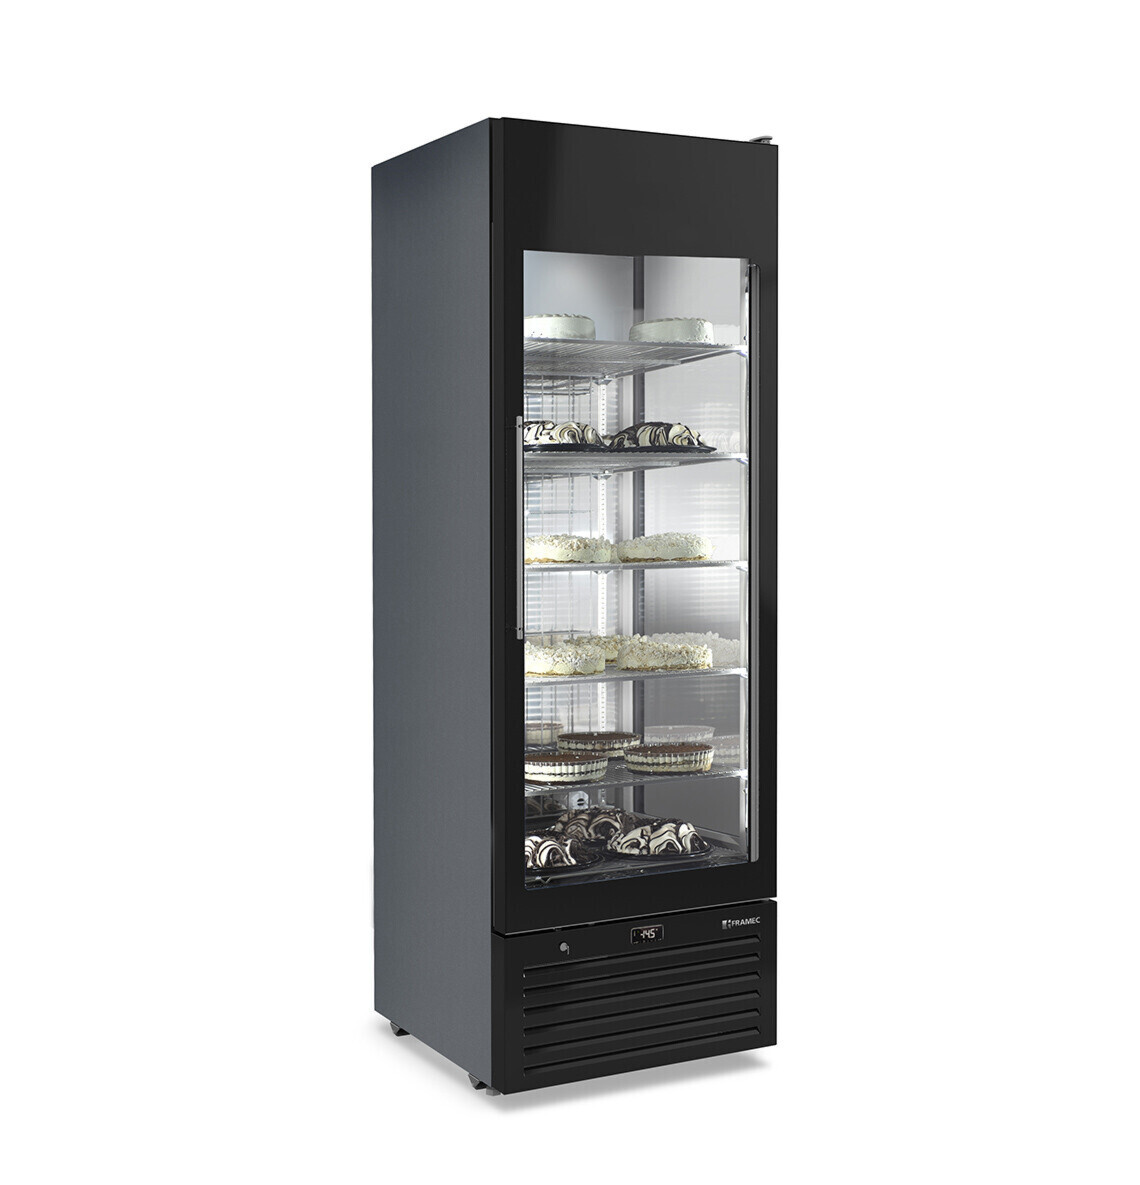 New arrivals 2020: Venere BS, a display for any kind of pastry and ice-cream product